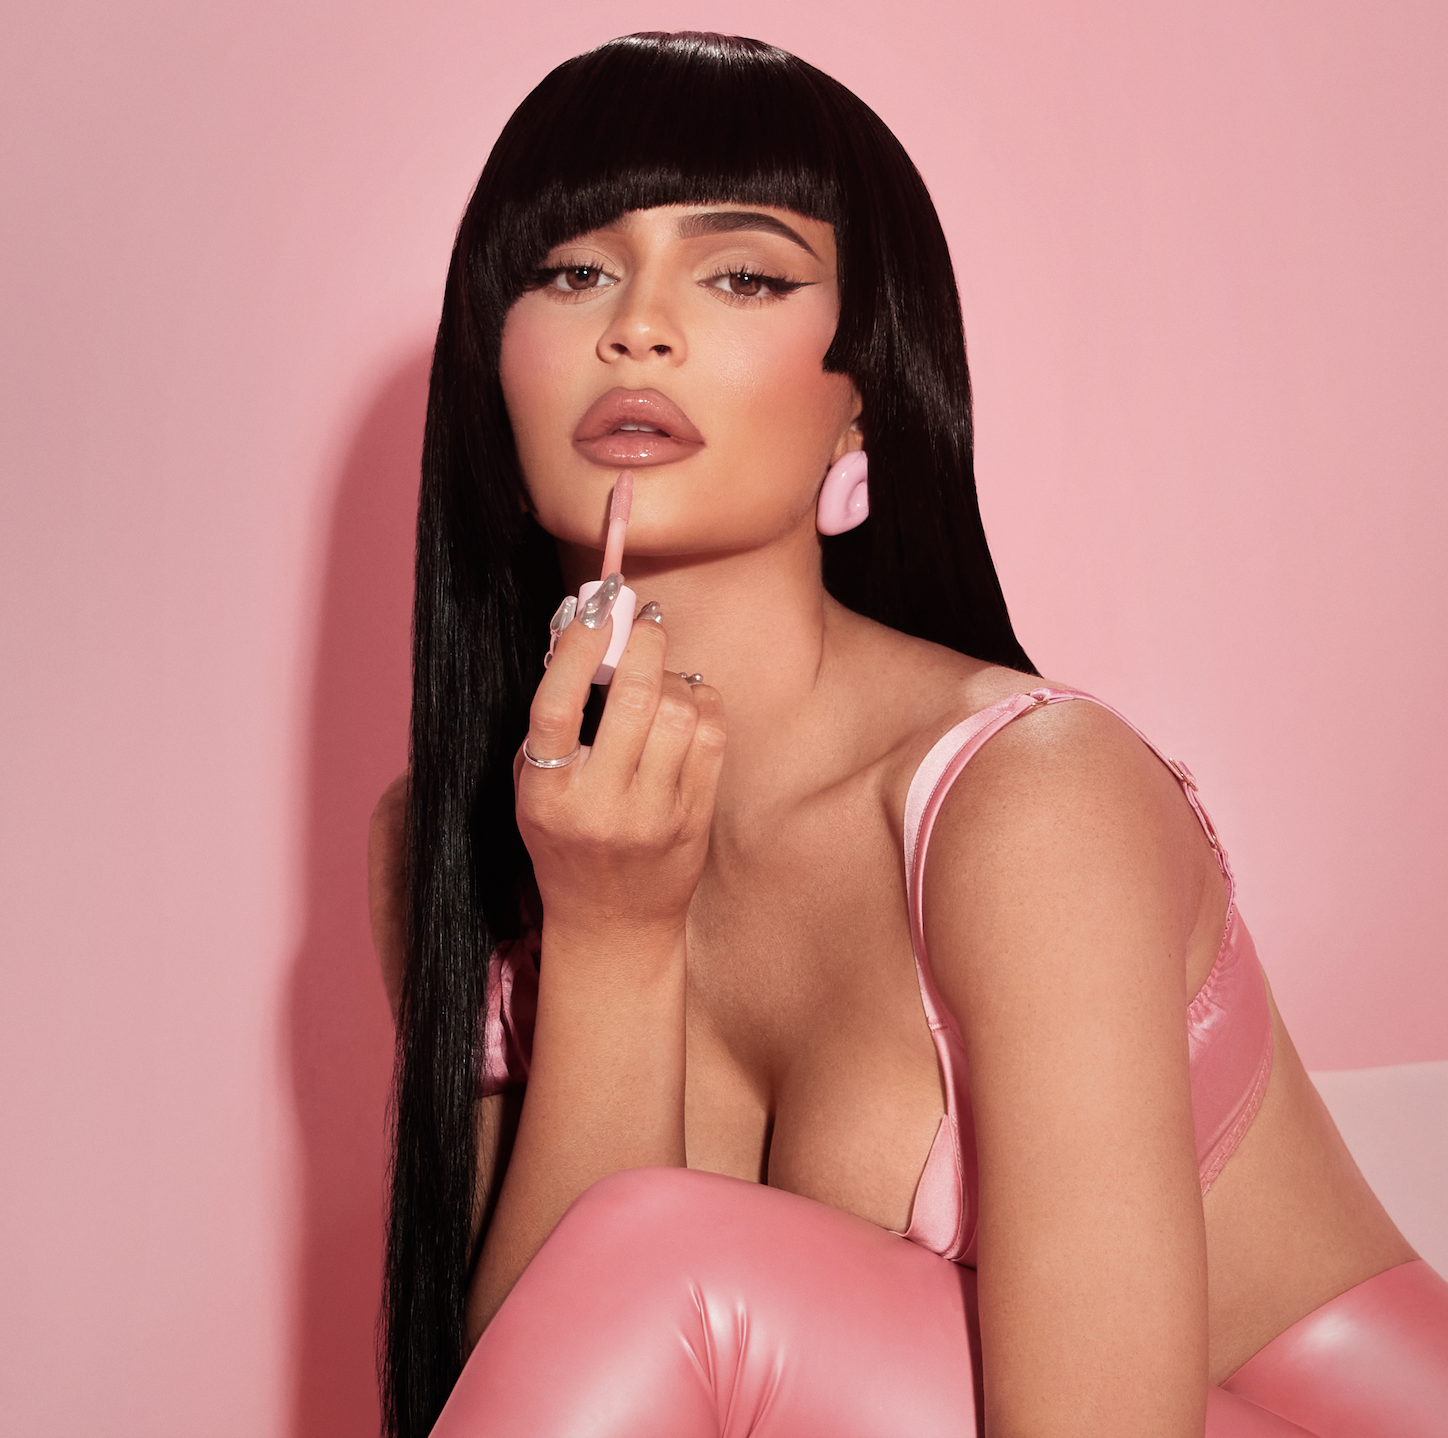 Kylie Jenner Just Relaunched Kylie Cosmetics With All New Products - New  Kylie Lip Kit